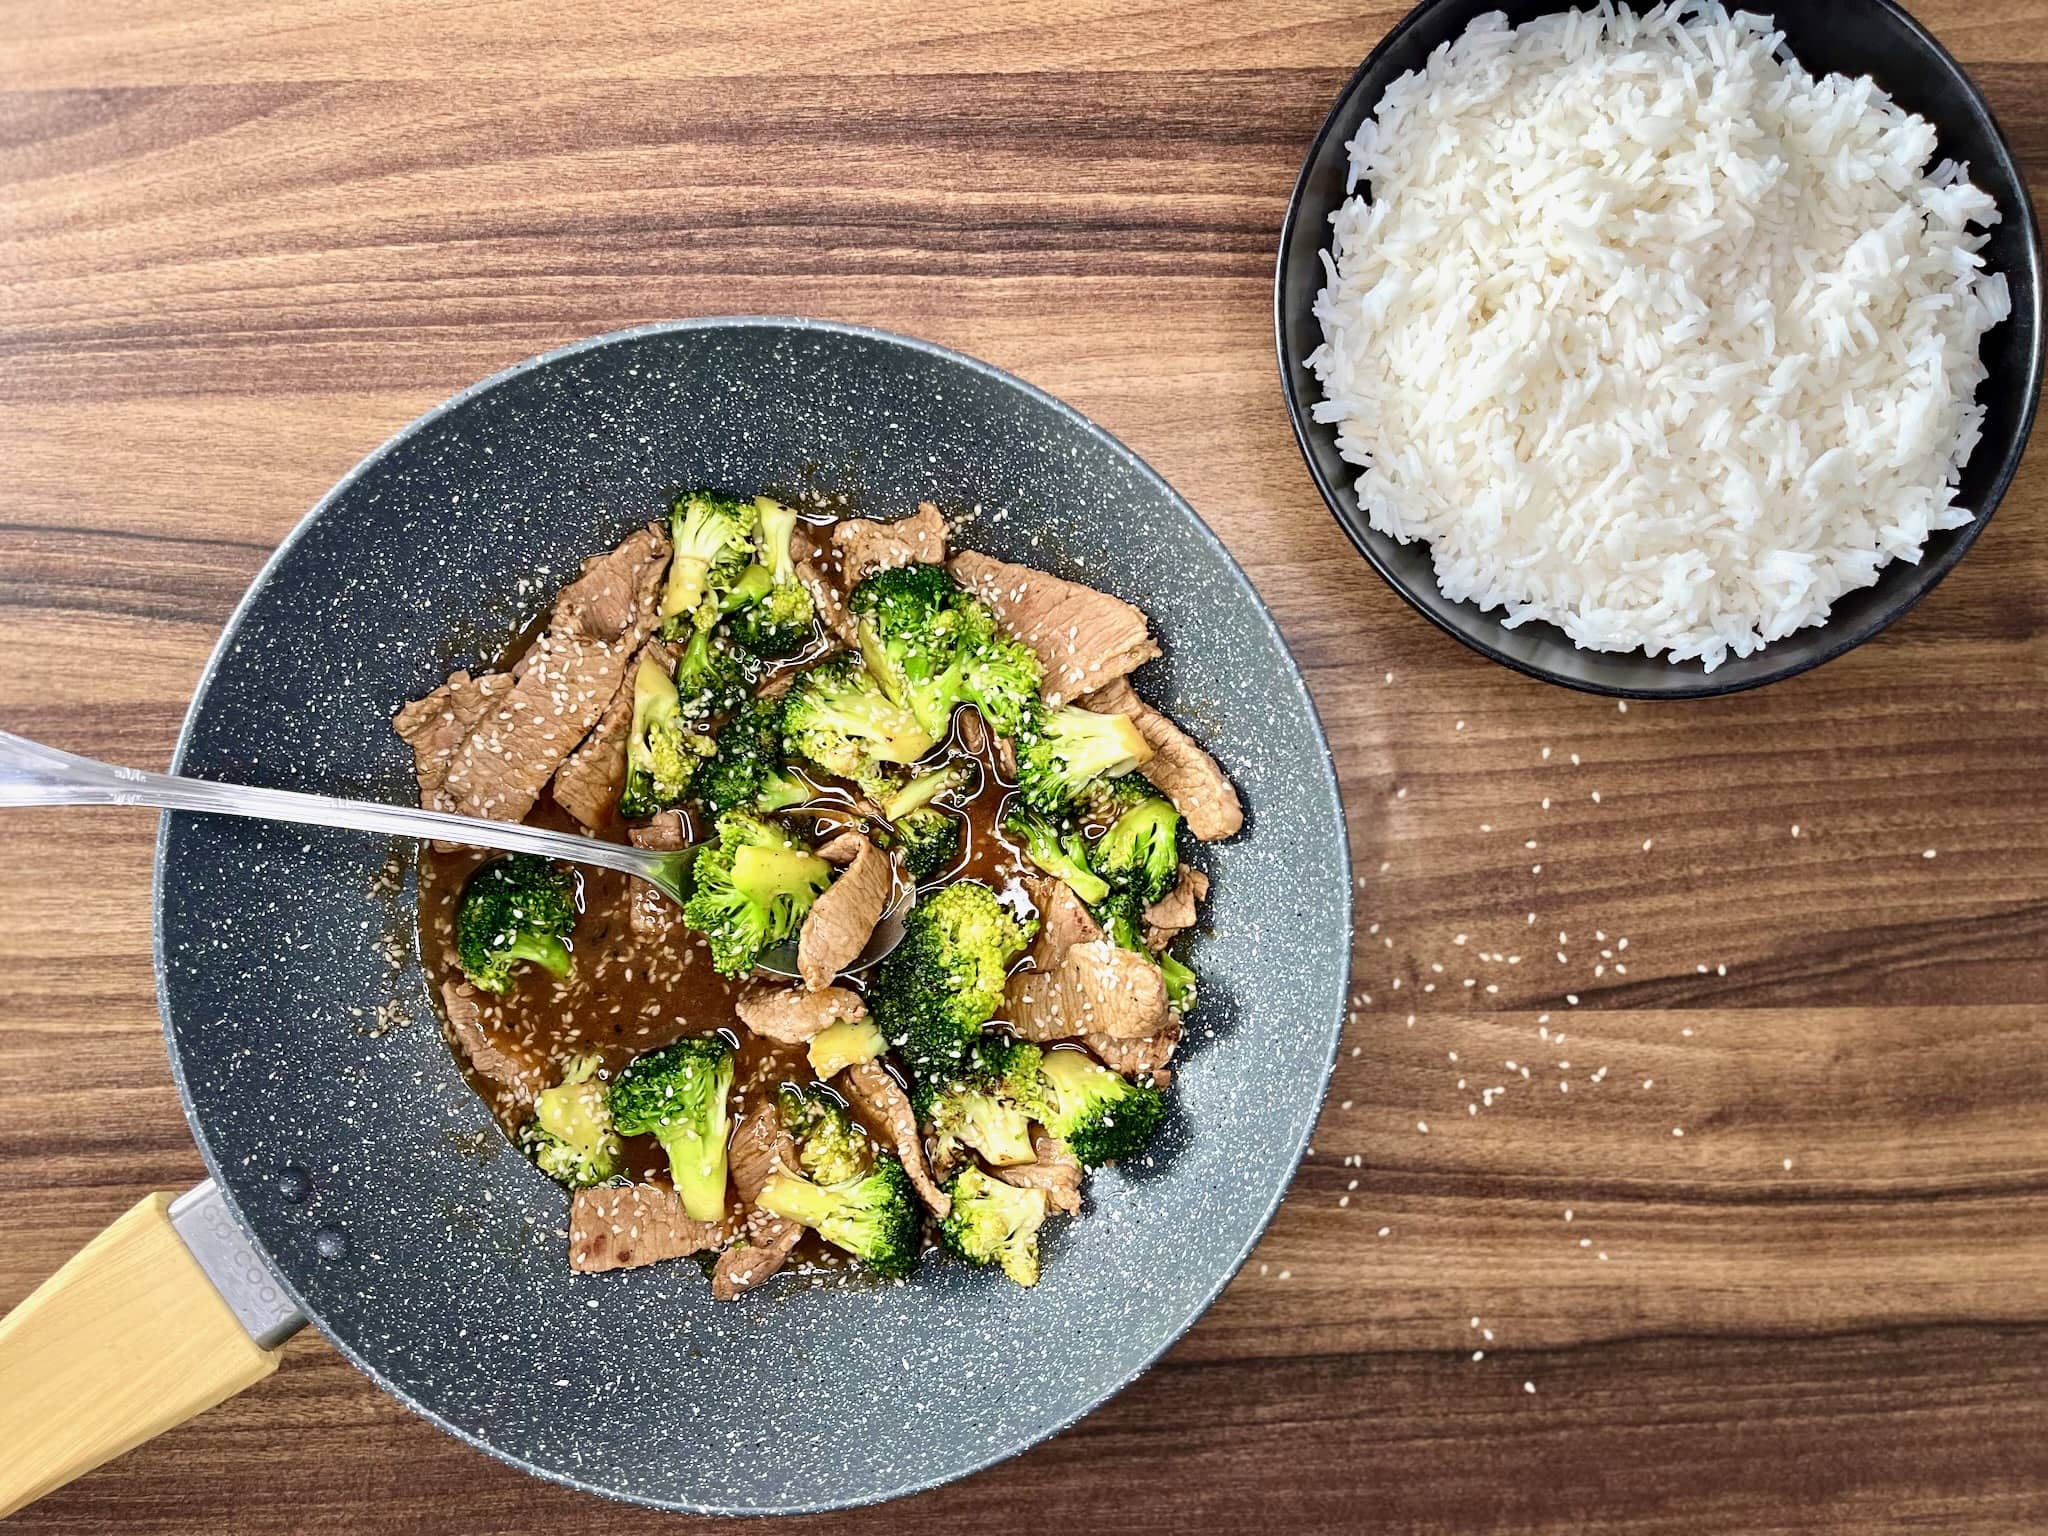 Beef and broccoli with egg noodles in a pan, with a bowl of rice on the side